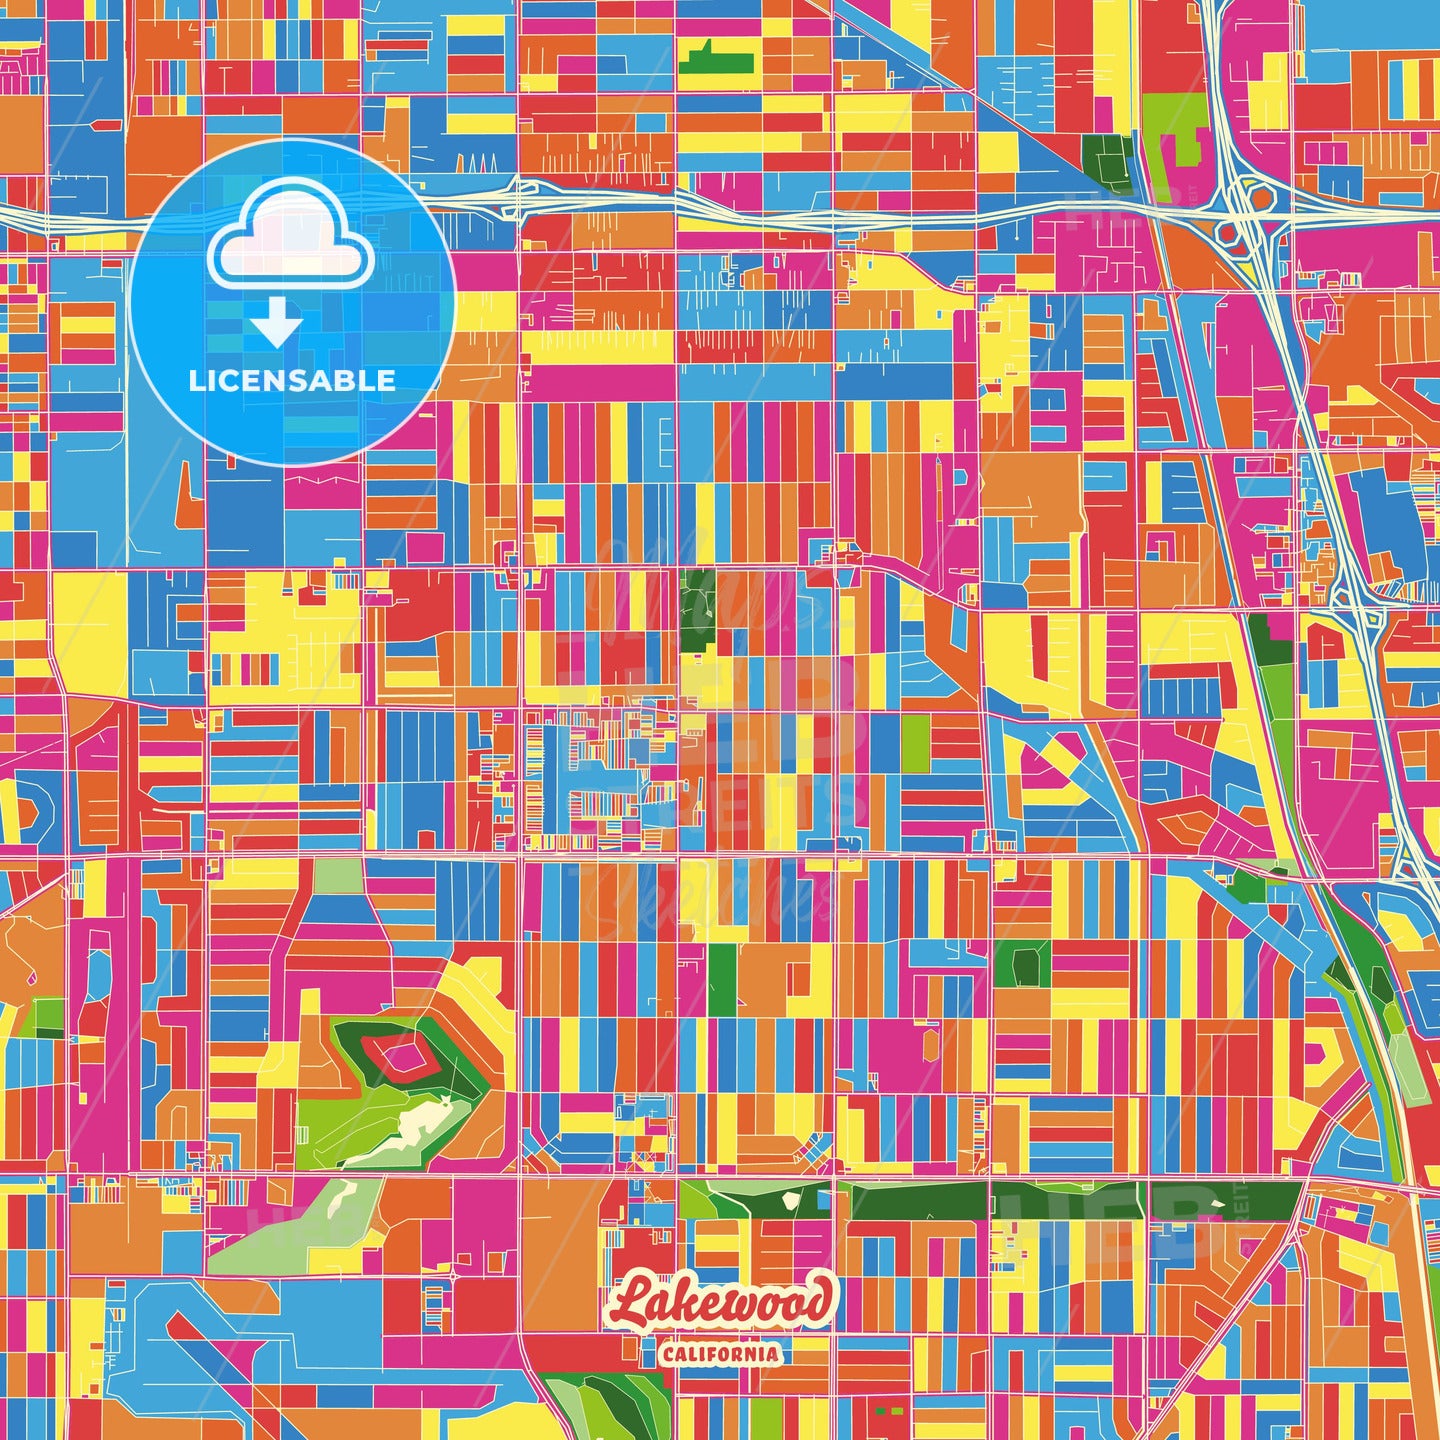 Lakewood, United States Crazy Colorful Street Map Poster Template - HEBSTREITS Sketches